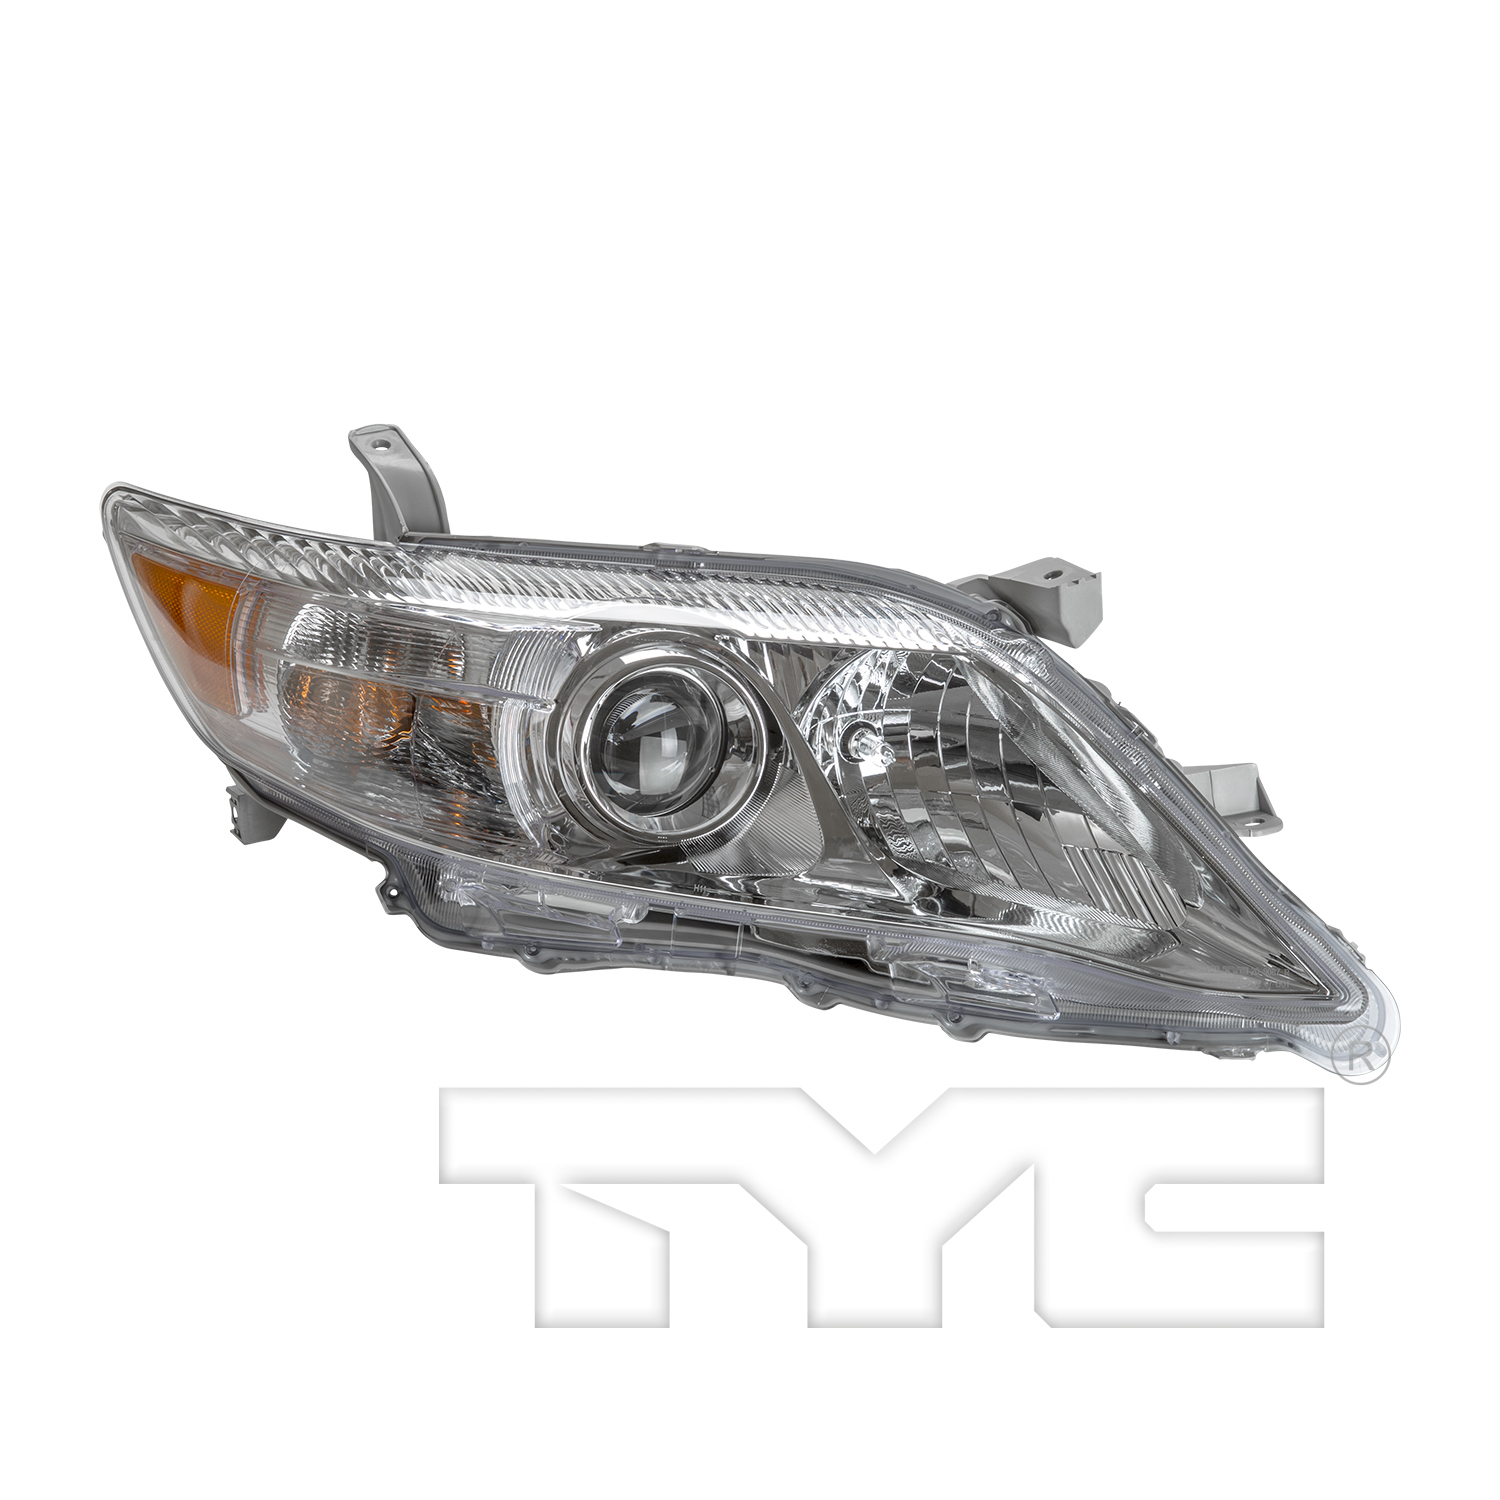 Aftermarket HEADLIGHTS for TOYOTA - CAMRY, CAMRY,10-11,RT Headlamp assy composite